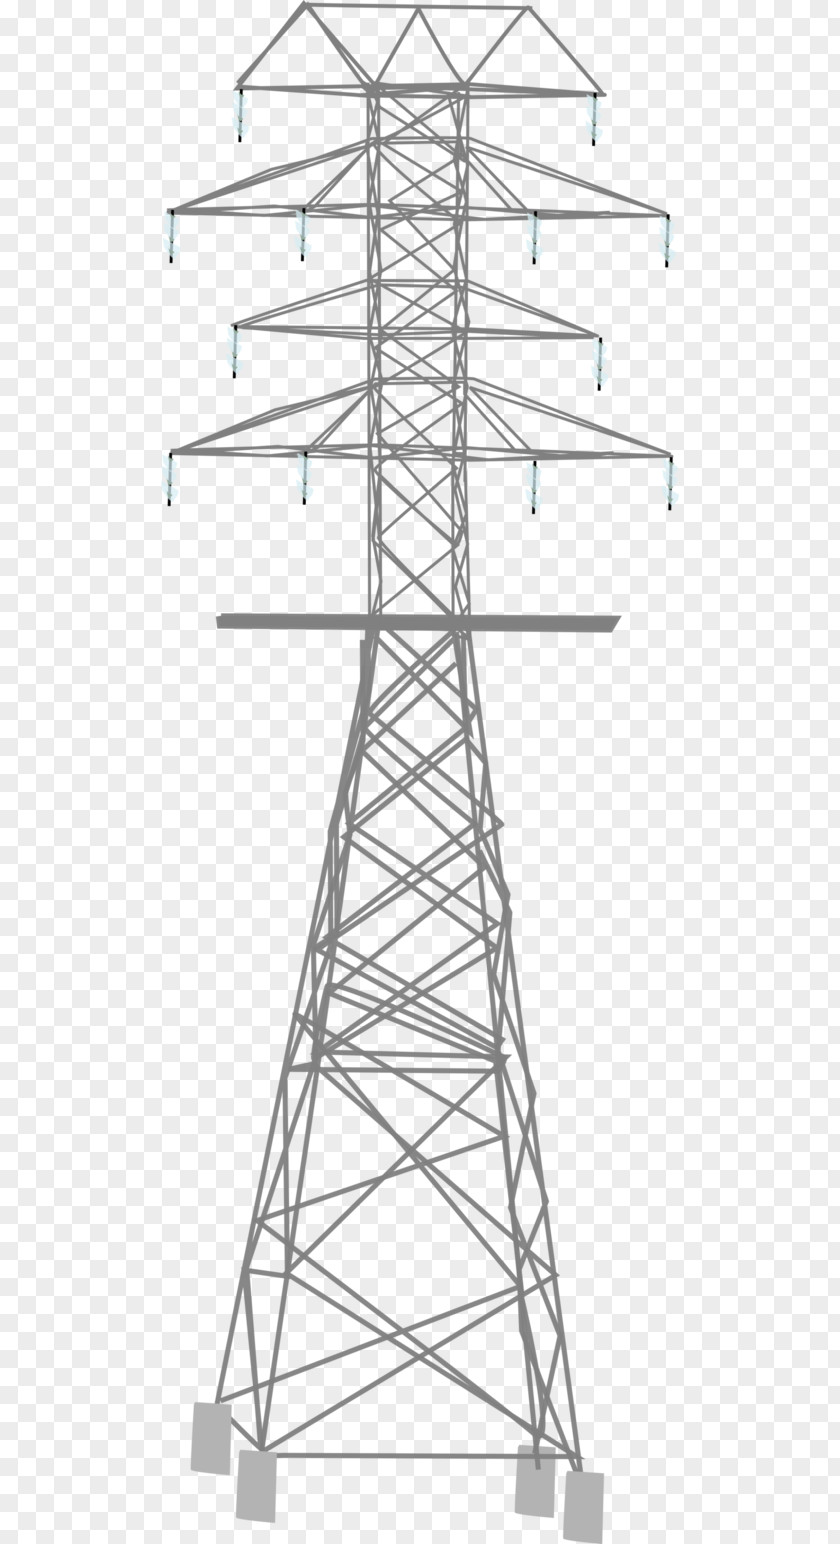 High Voltage Drawing Overhead Power Line Transmission Tower Electric Potential Difference PNG